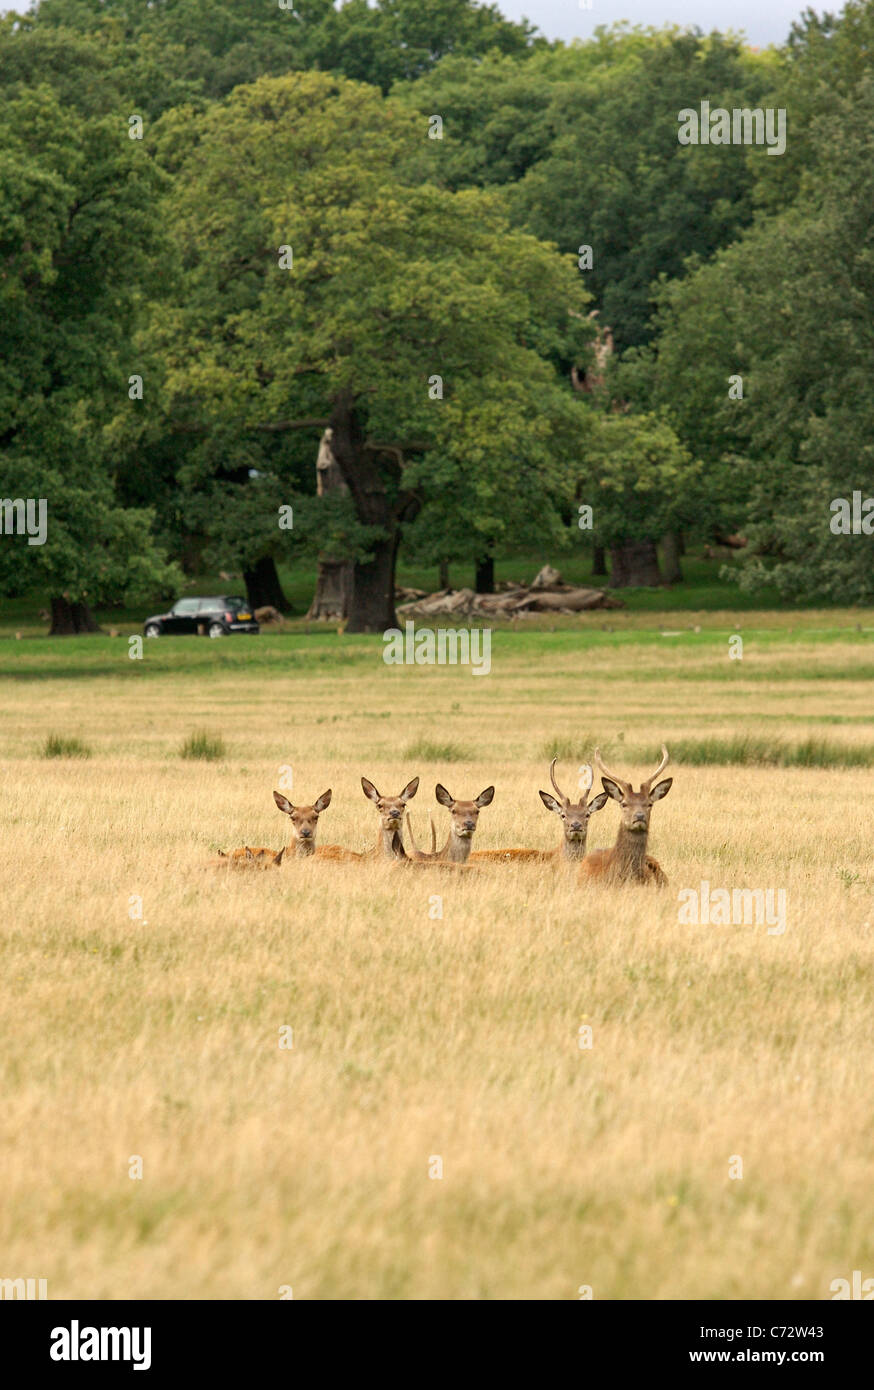 A herd of deer lie in a grass field in Richmond Park while a Mini drives along in the background Stock Photo